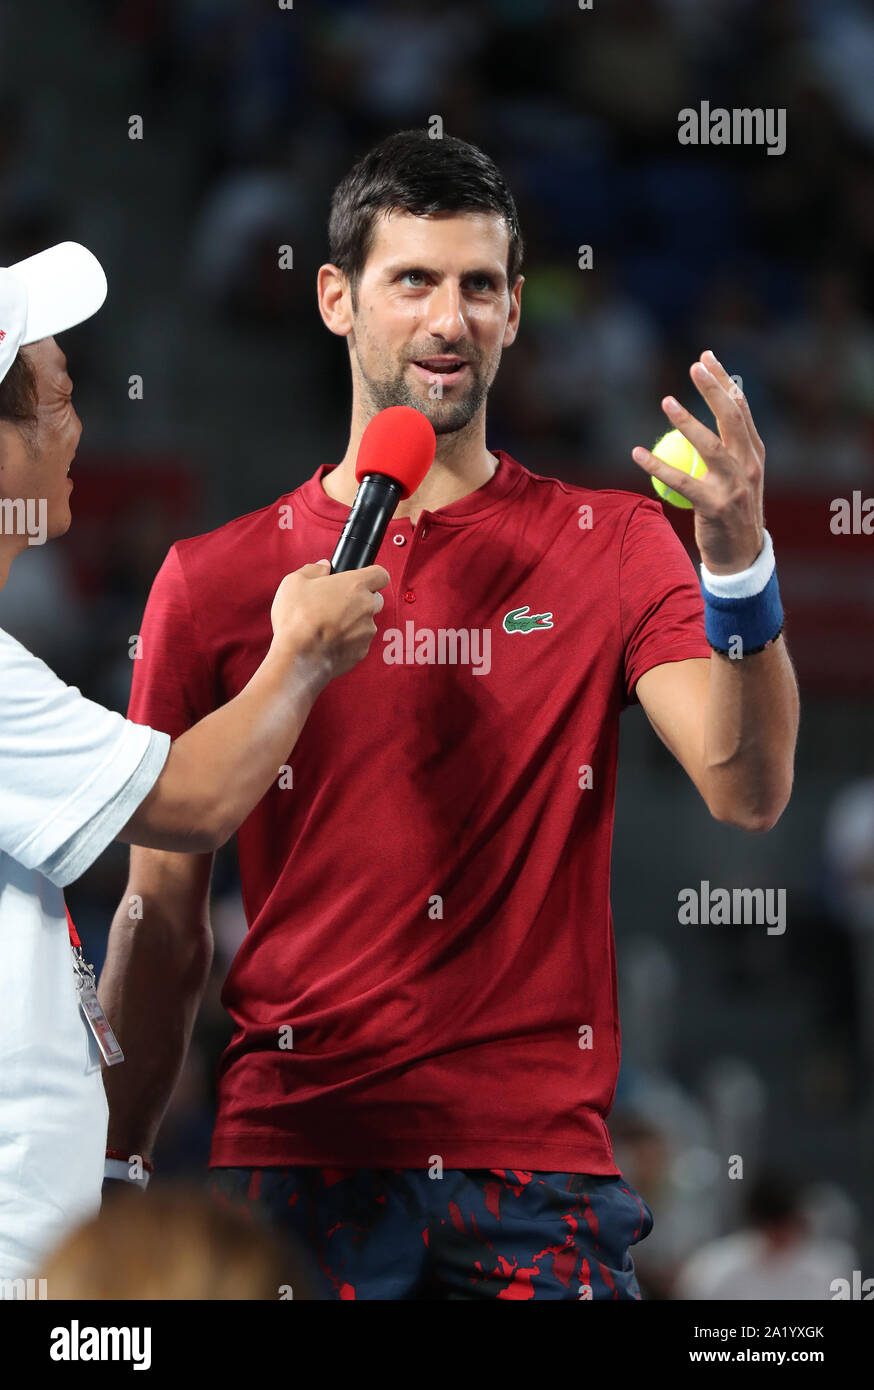 tokyo-japan-29th-sep-2019-worlds-no1-ranker-novak-djokovic-of-serbia-is-interviewed-after-a-training-session-for-the-rakuten-japan-open-tennis-championships-at-the-ariake-colosseum-in-tokyo-on-sunday-september-29-2019-a-2-million-us-dollars-atp500-tournament-will-be-held-here-from-september-30-through-october-6-credit-yoshio-tsunodaafloalamy-live-news-2A1YXGK.jpg